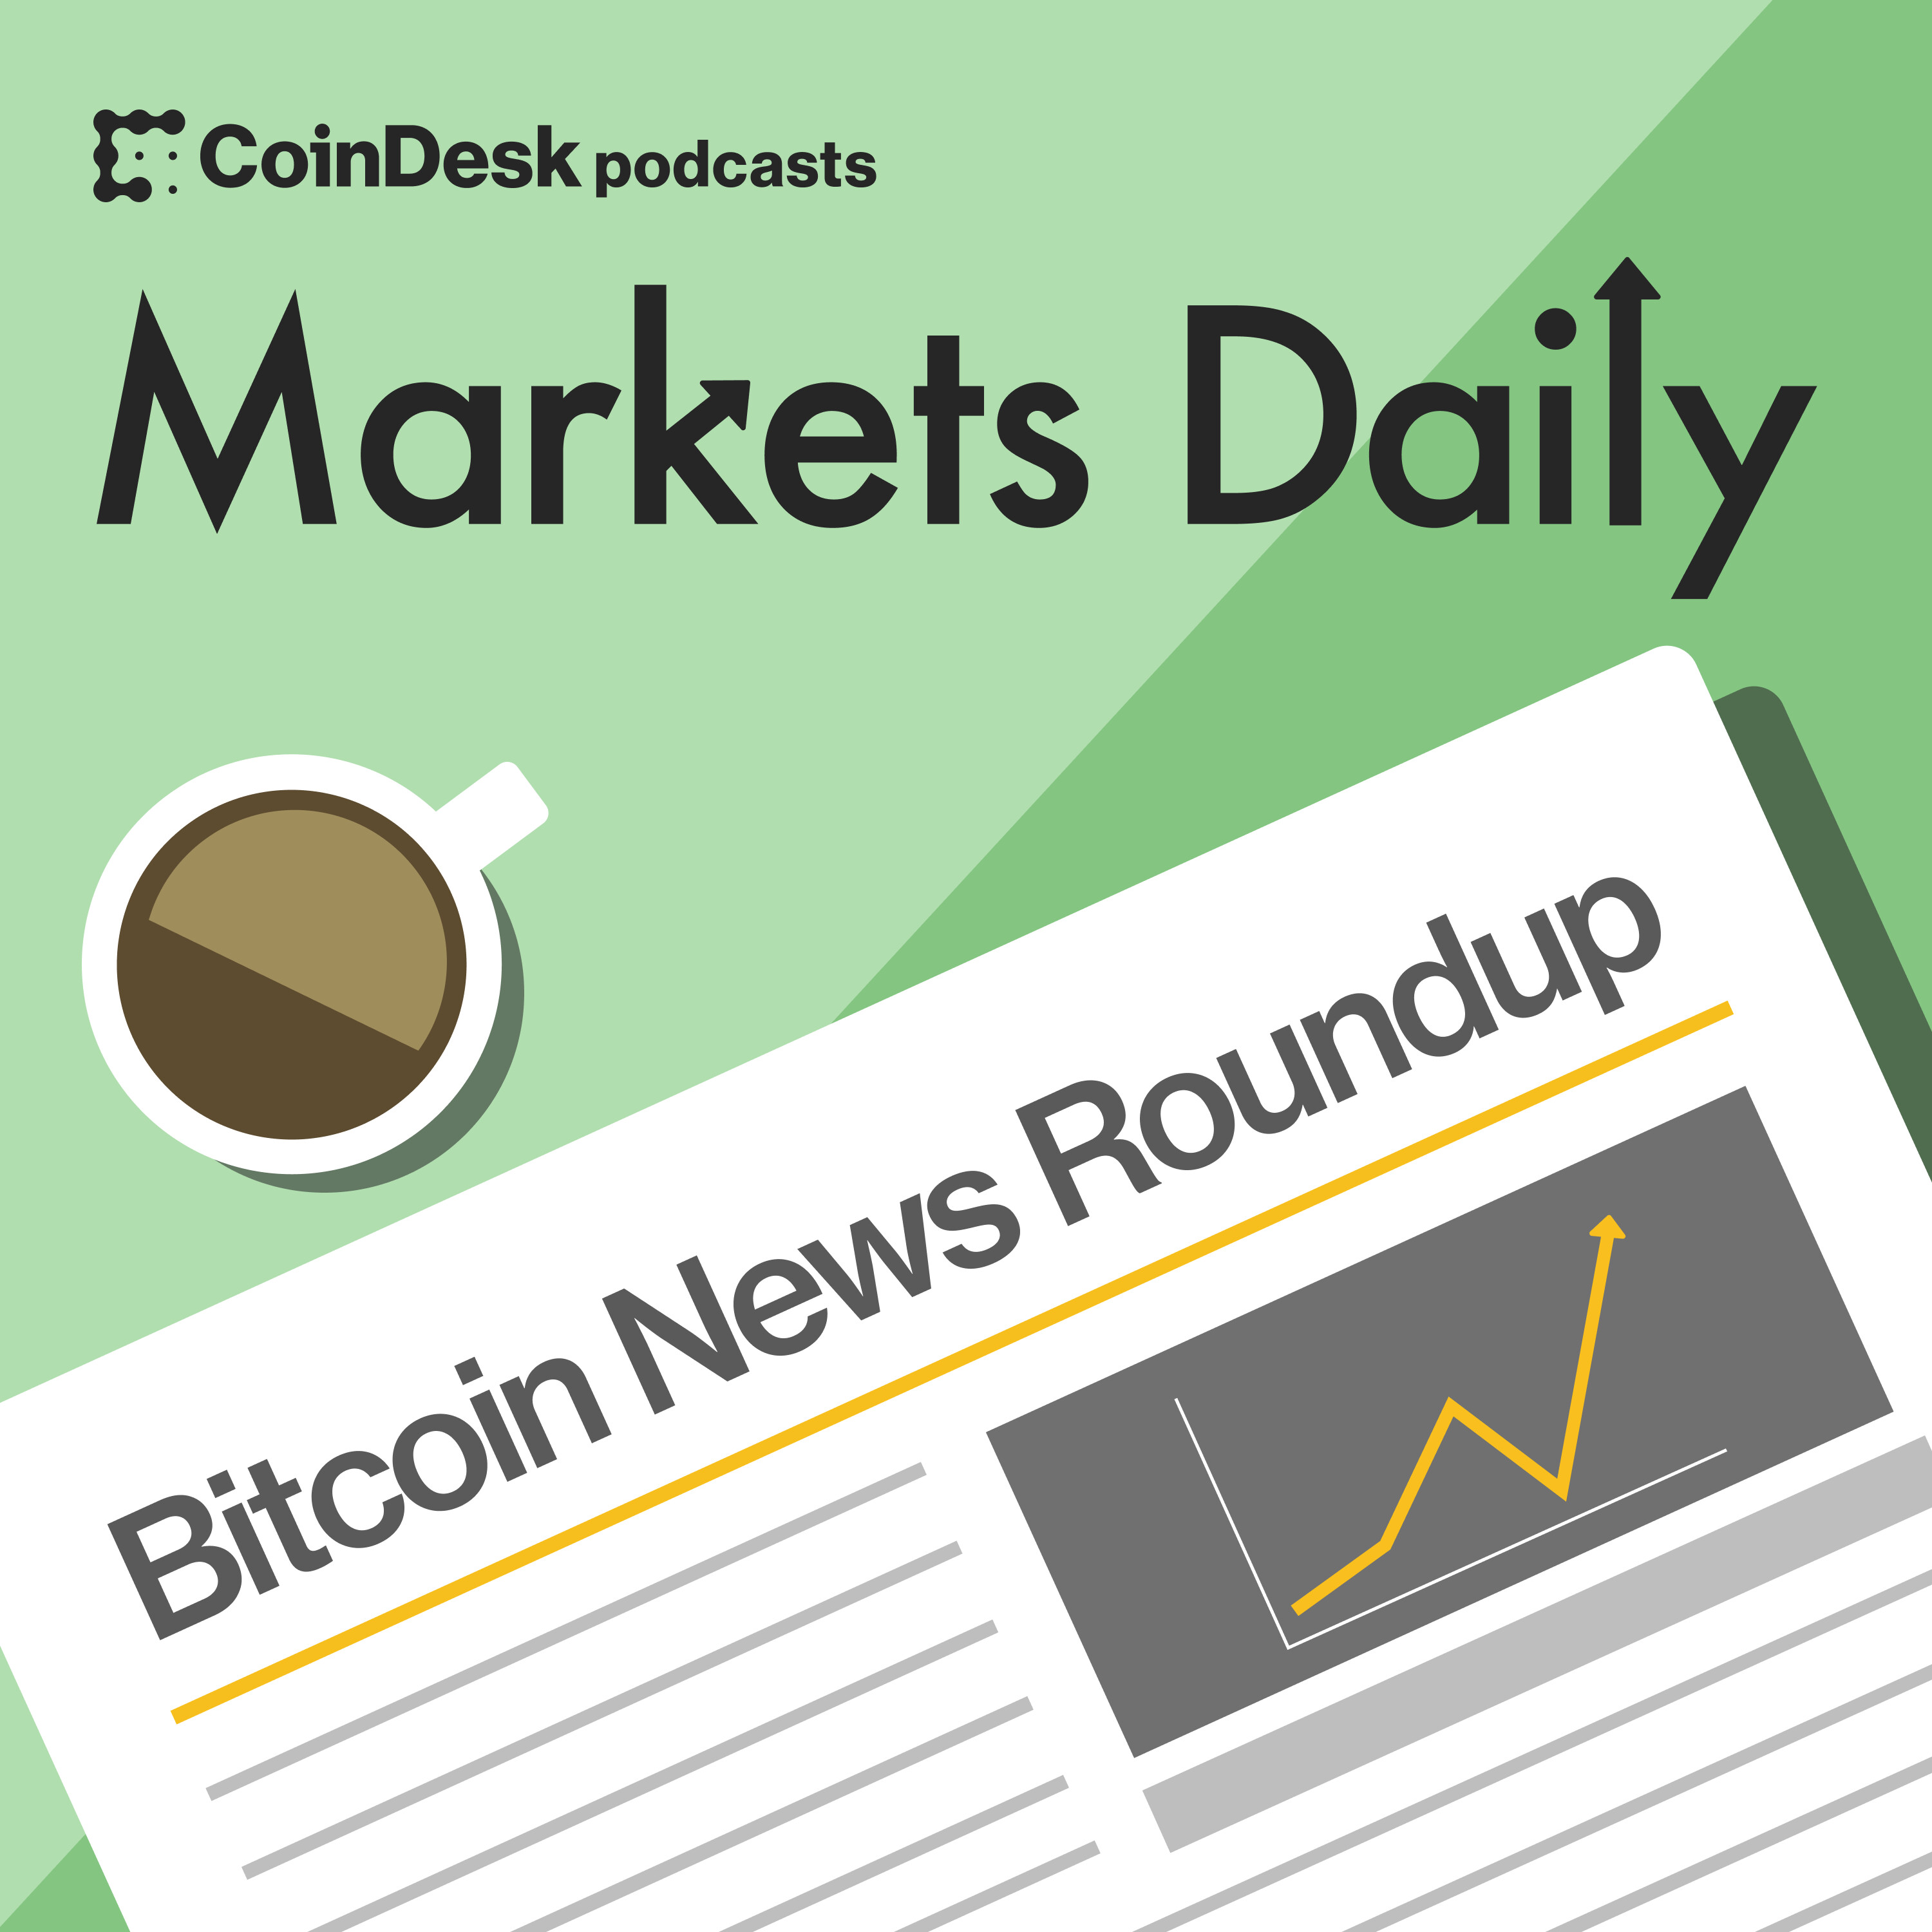 MARKETS DAILY: Crypto Update | Bitcoin Mining in the U.S. Will Become ’a Lot More Decentralized’: Core Scientific CEO